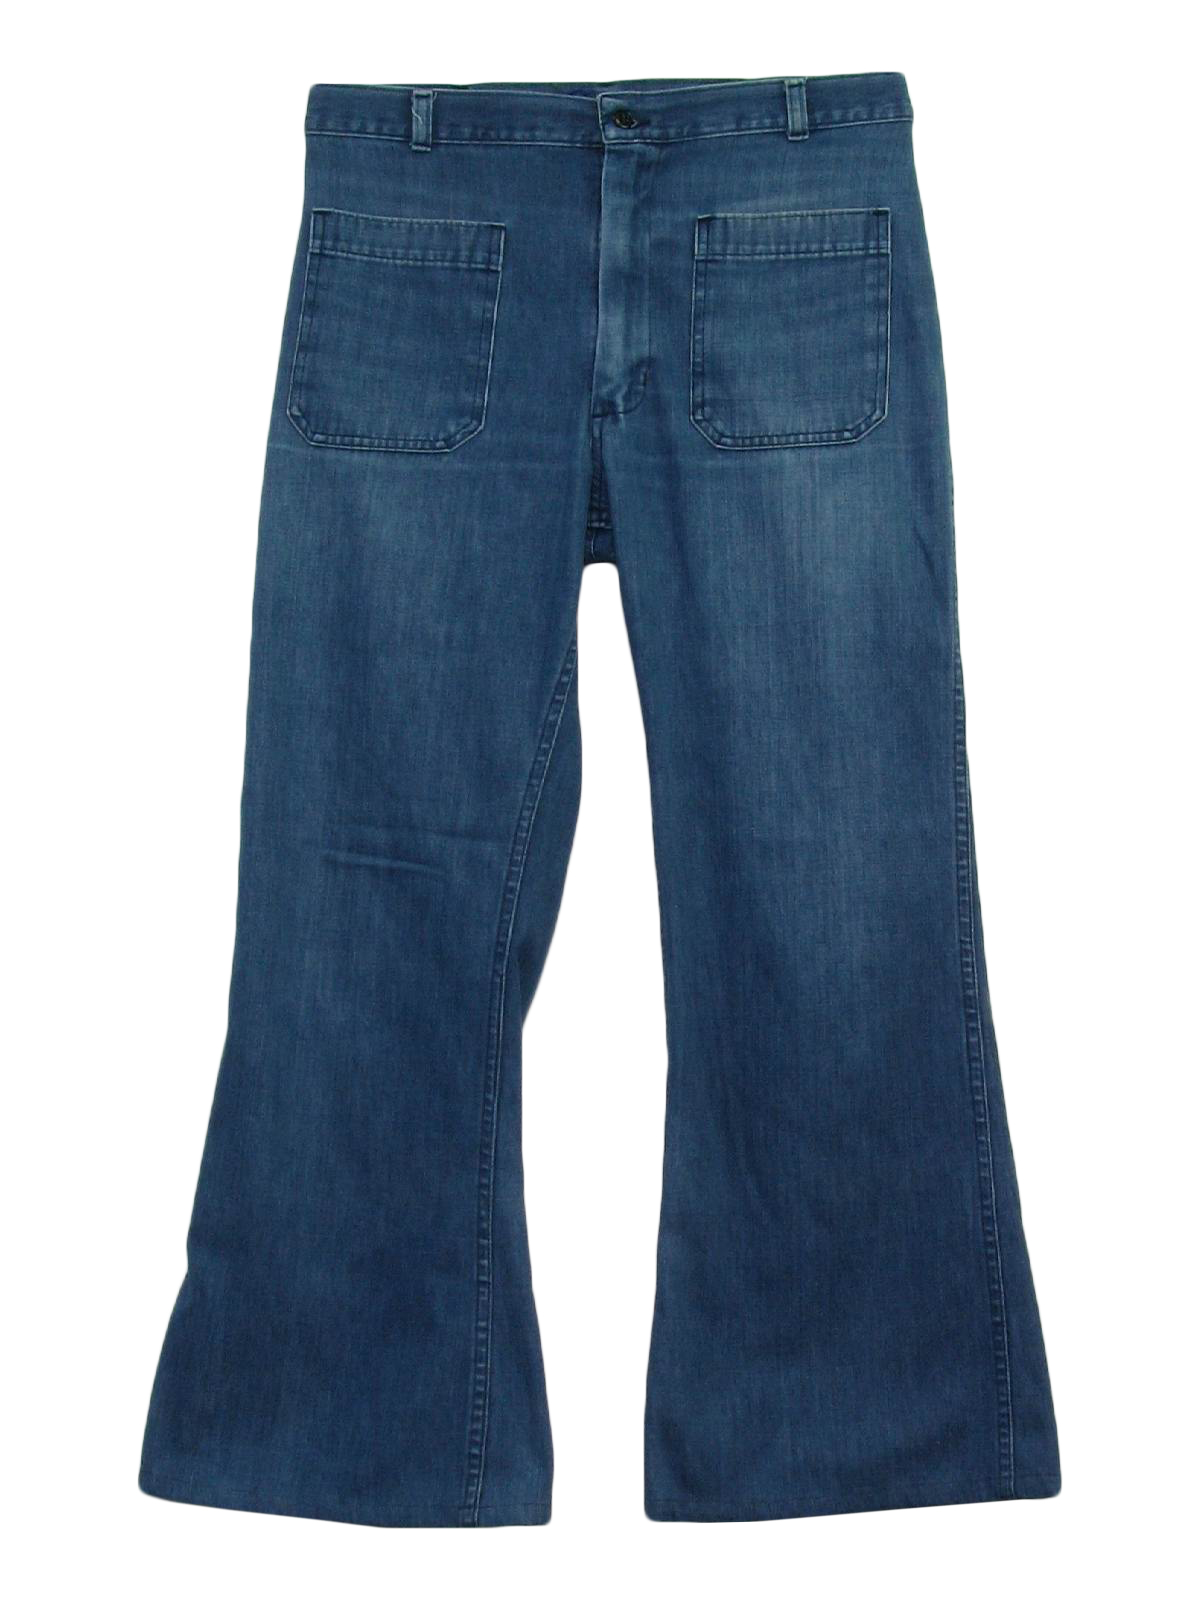 70s Bellbottom Pants (Utility Trousers): 70s -Utility Trousers- Mens ...